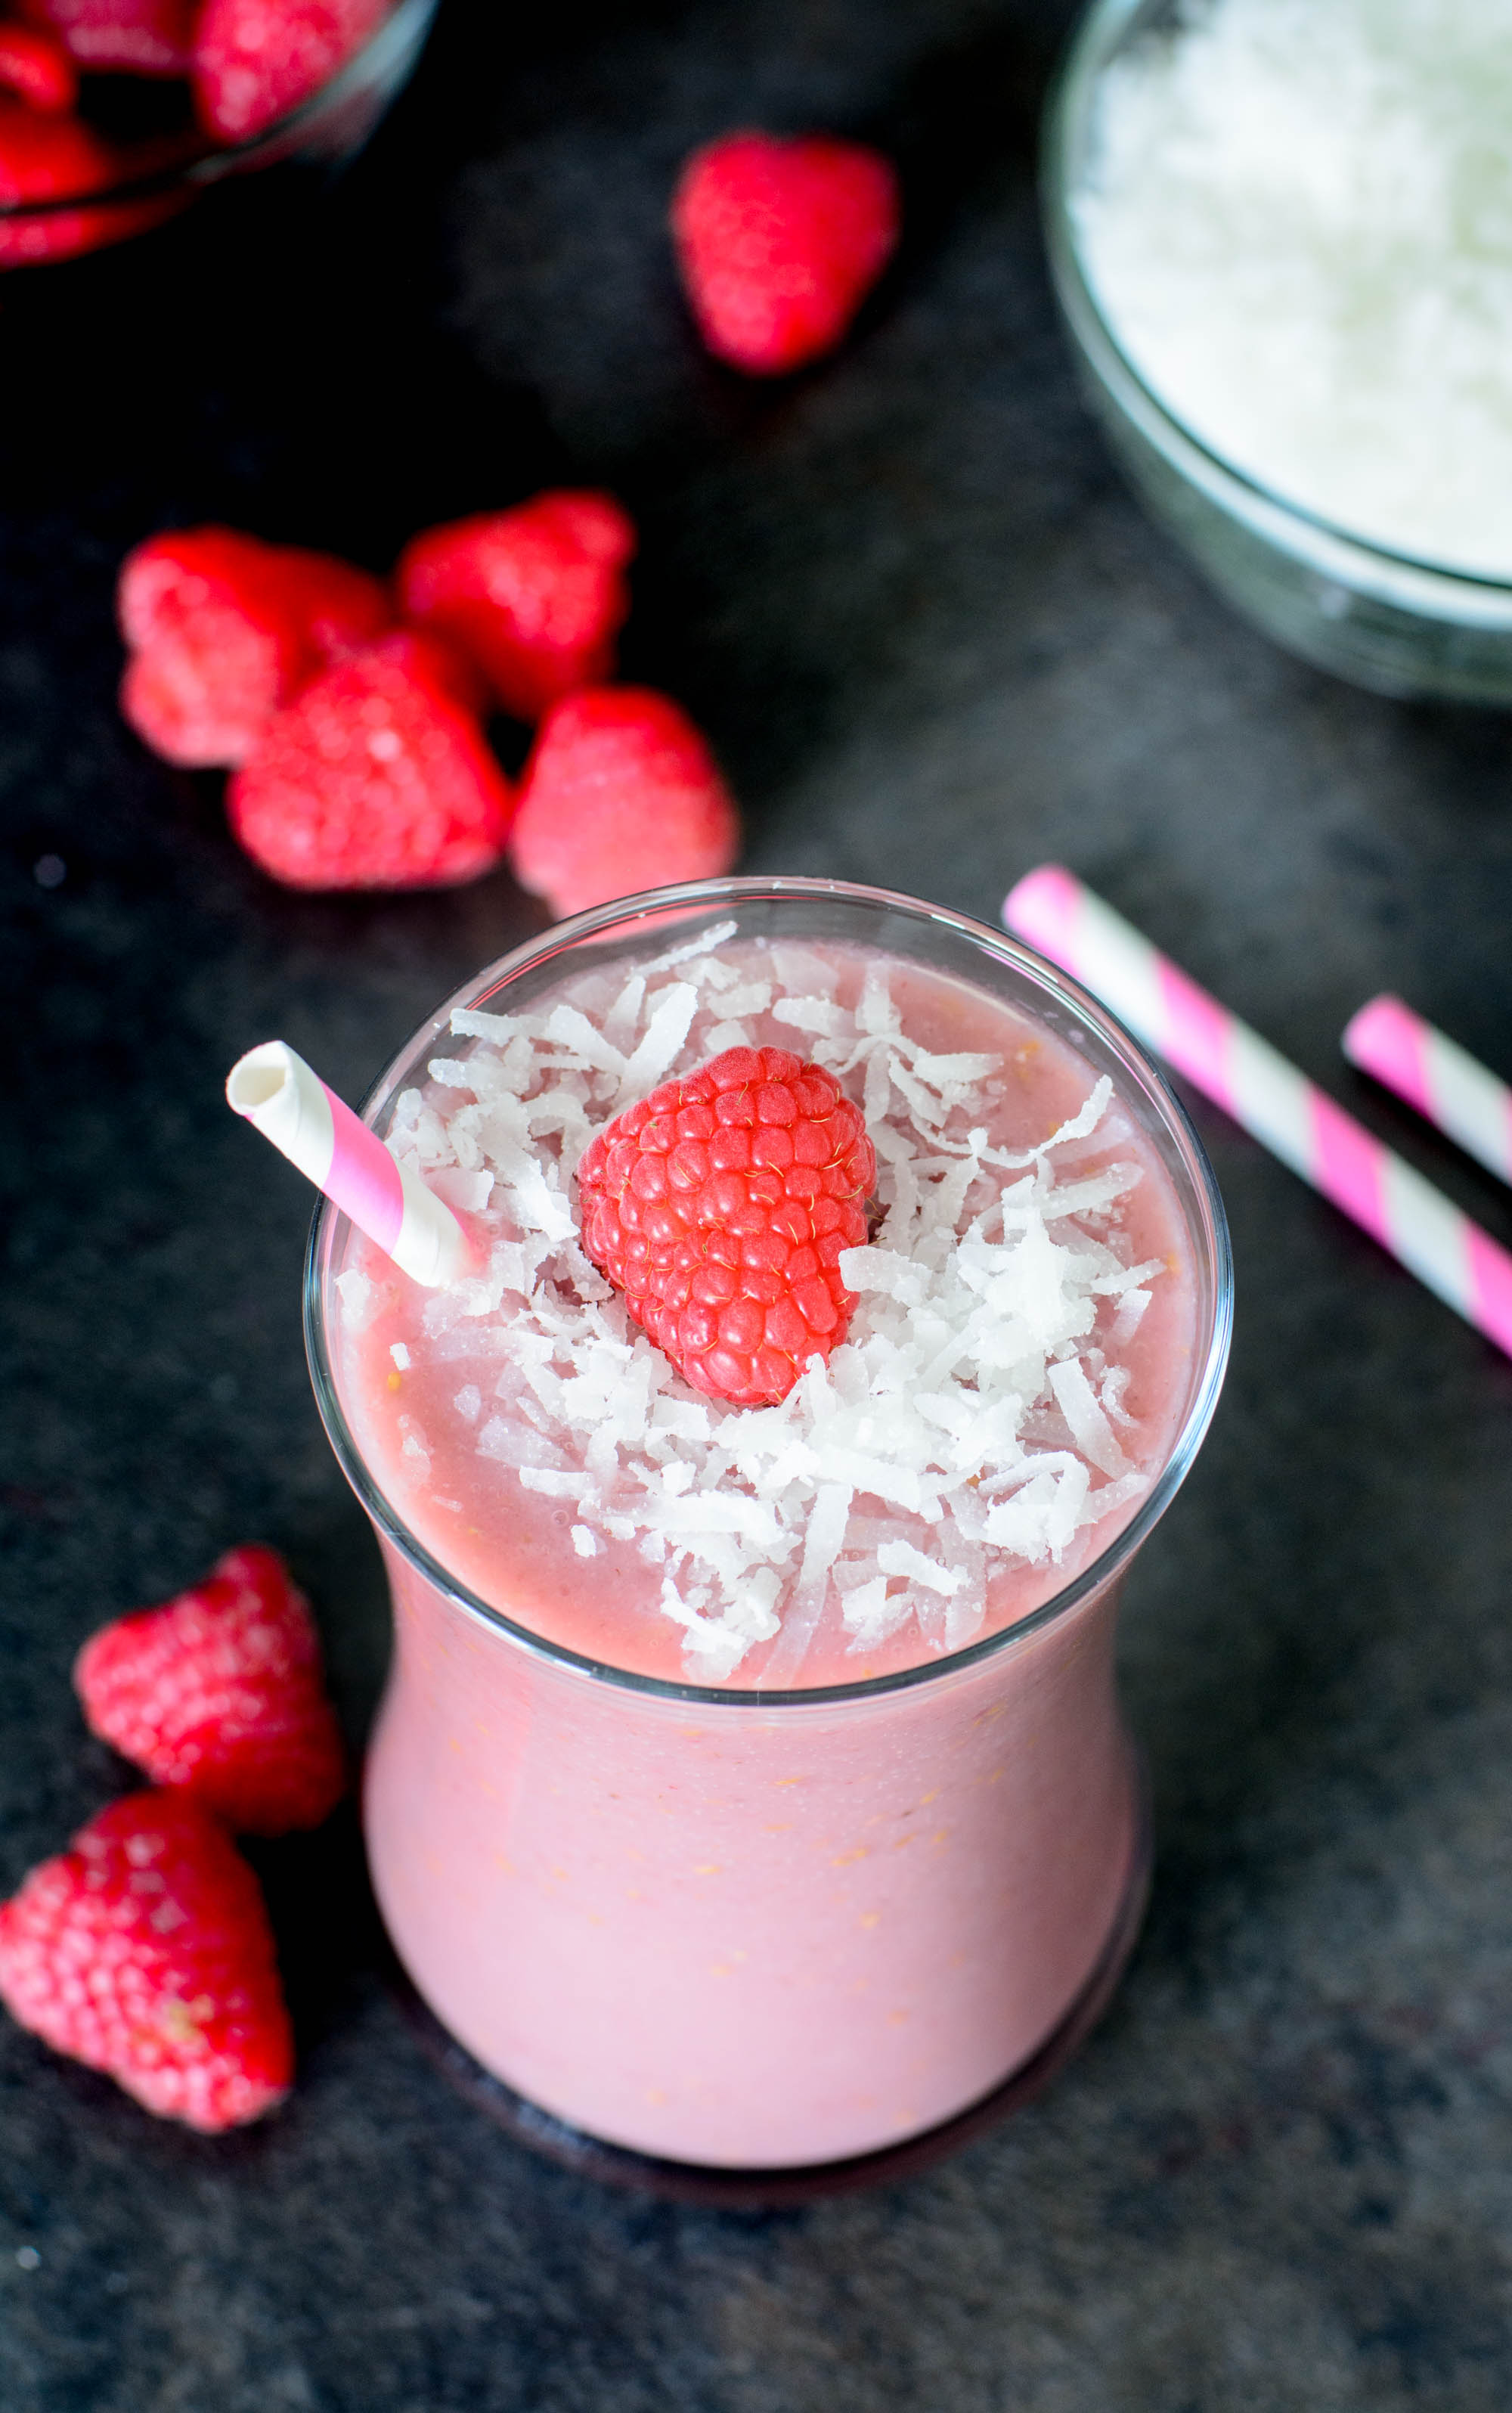 This Raspberry Coconut Breakfast Smoothie is sweet, creamy, healthy, and SO delicious! Start your morning off on the right foot with this amazing smoothie recipe! 